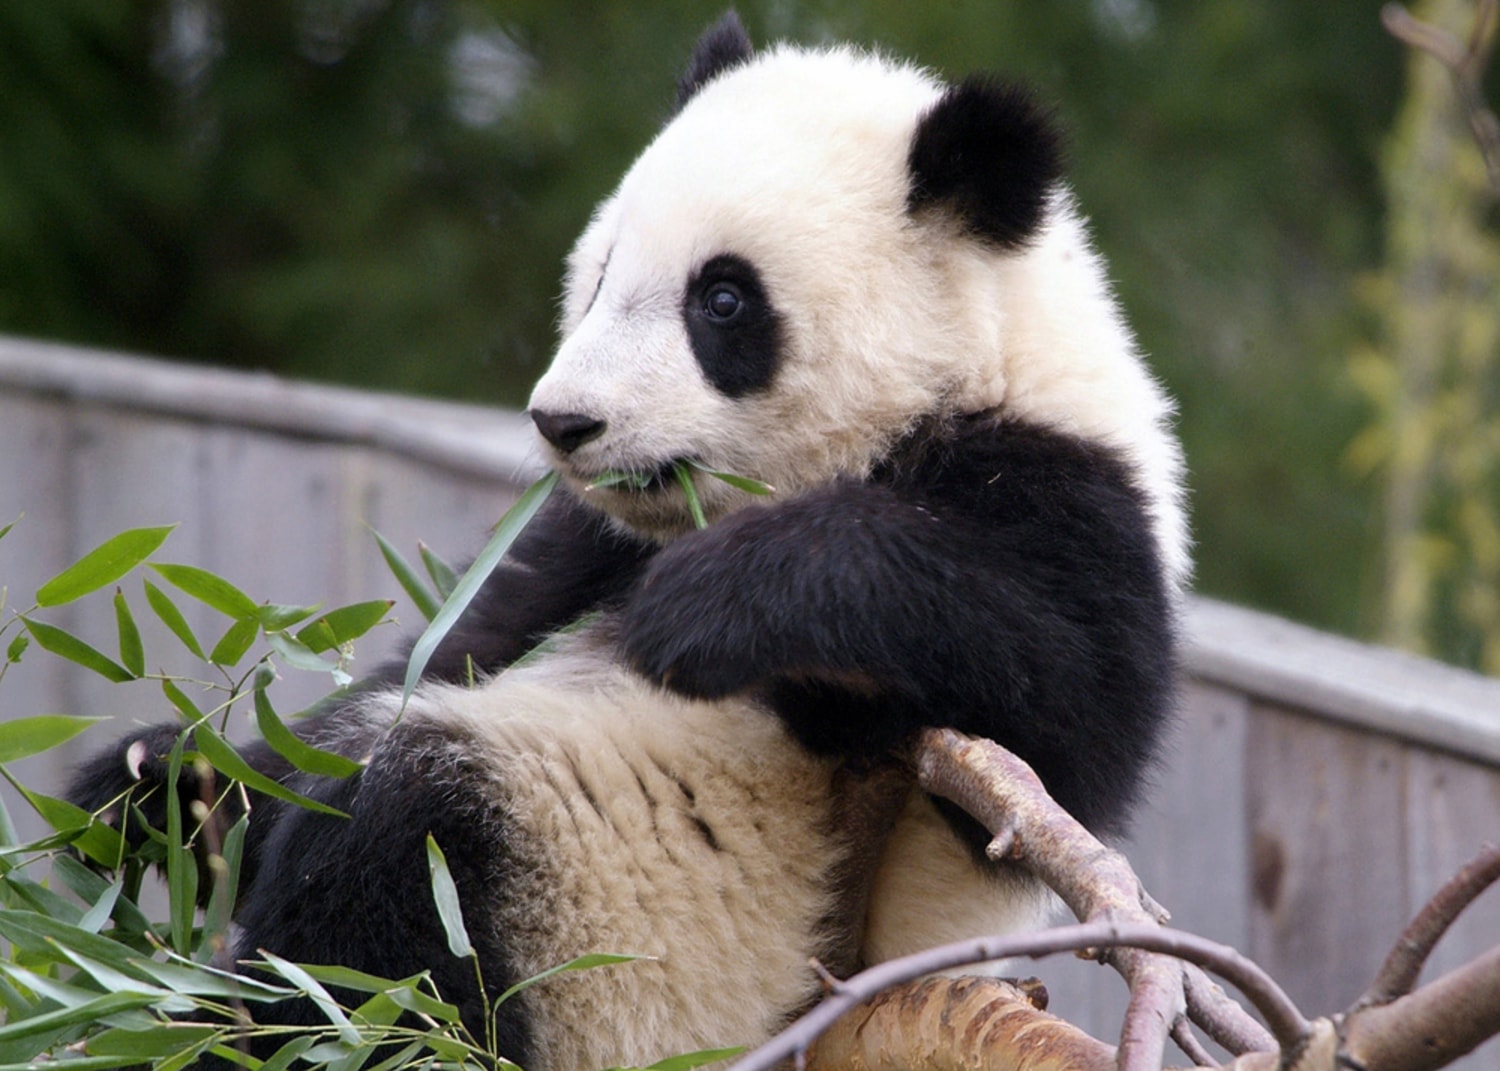 Attention: The Zoo's Panda Cub Is Learning New Tricks and Is a